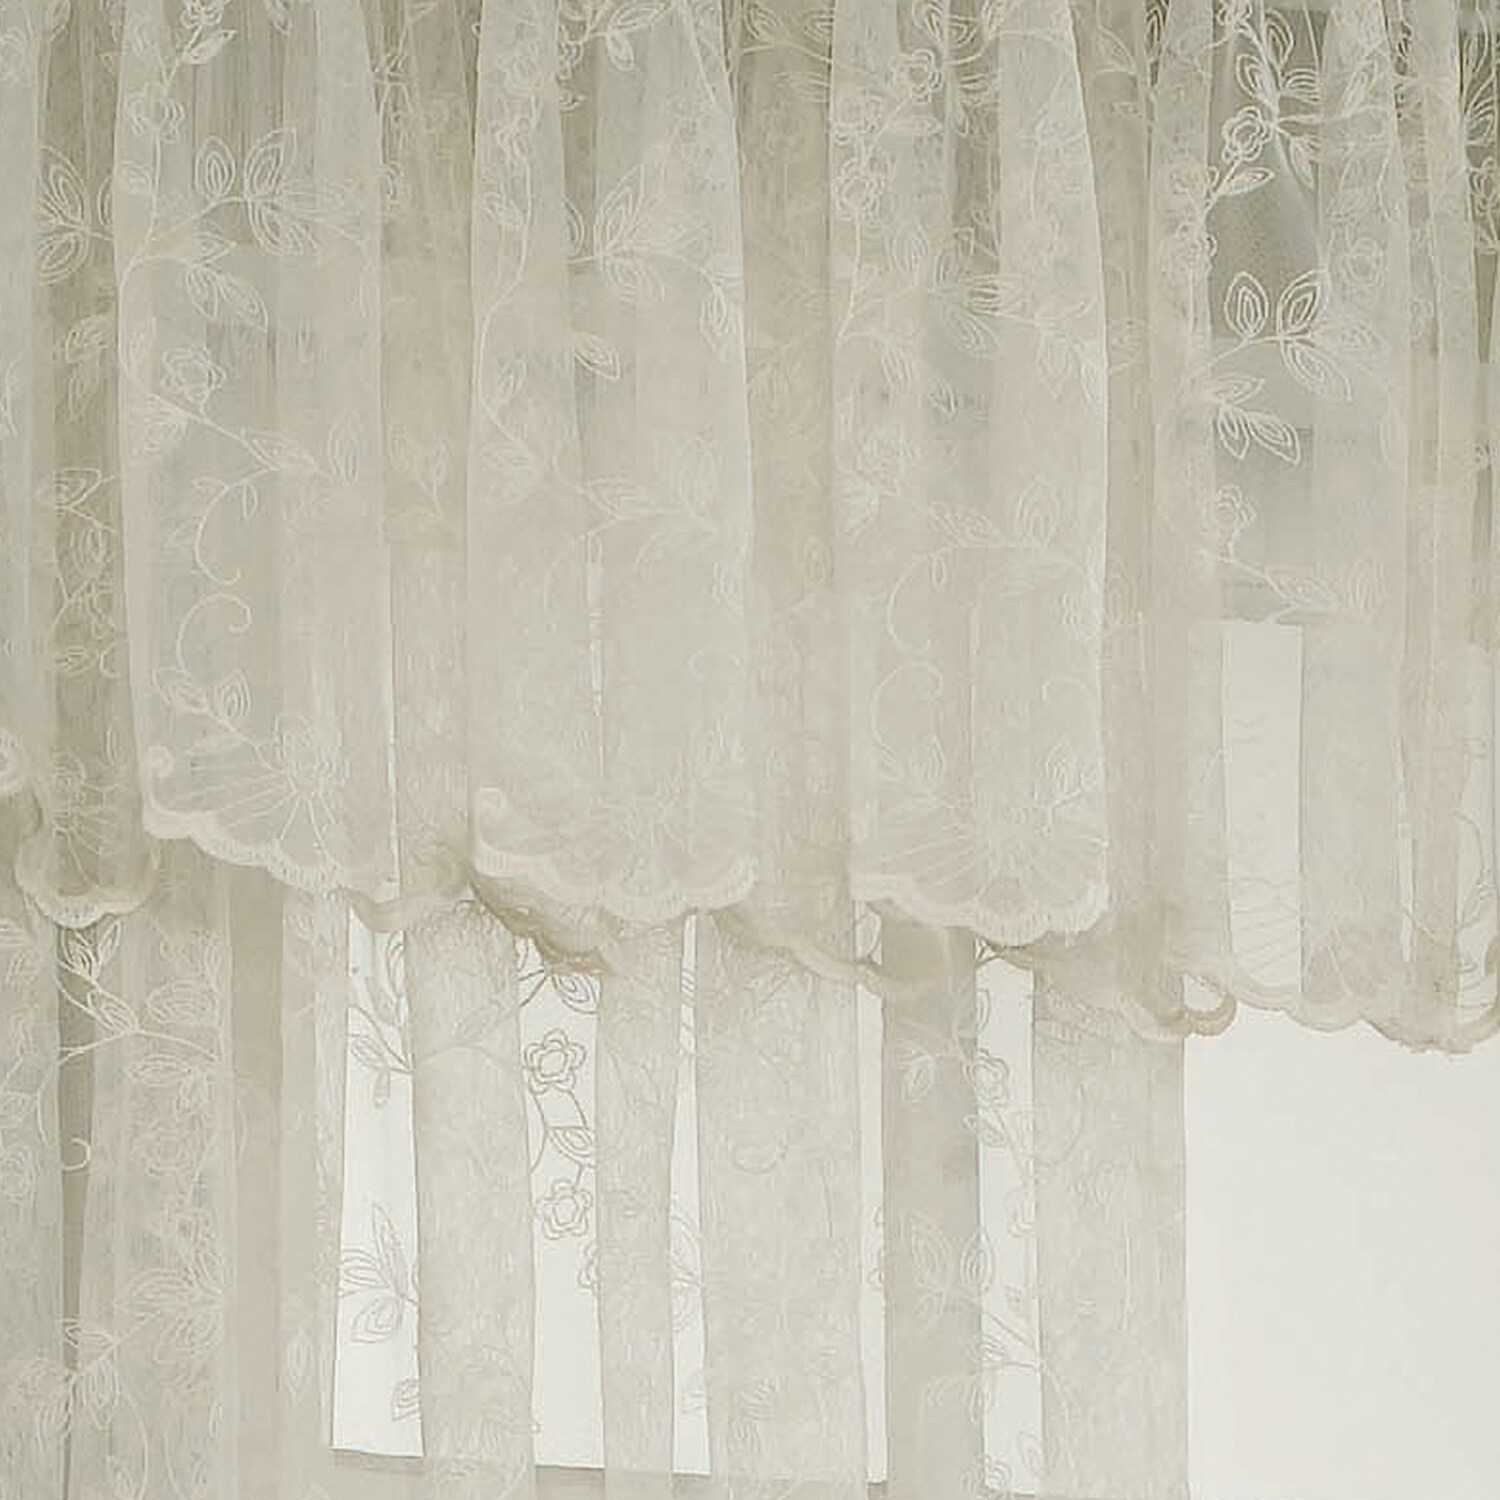 54" X 17" Details about   STYLE  cecelia Embroidered Lace Valances #0278769 White